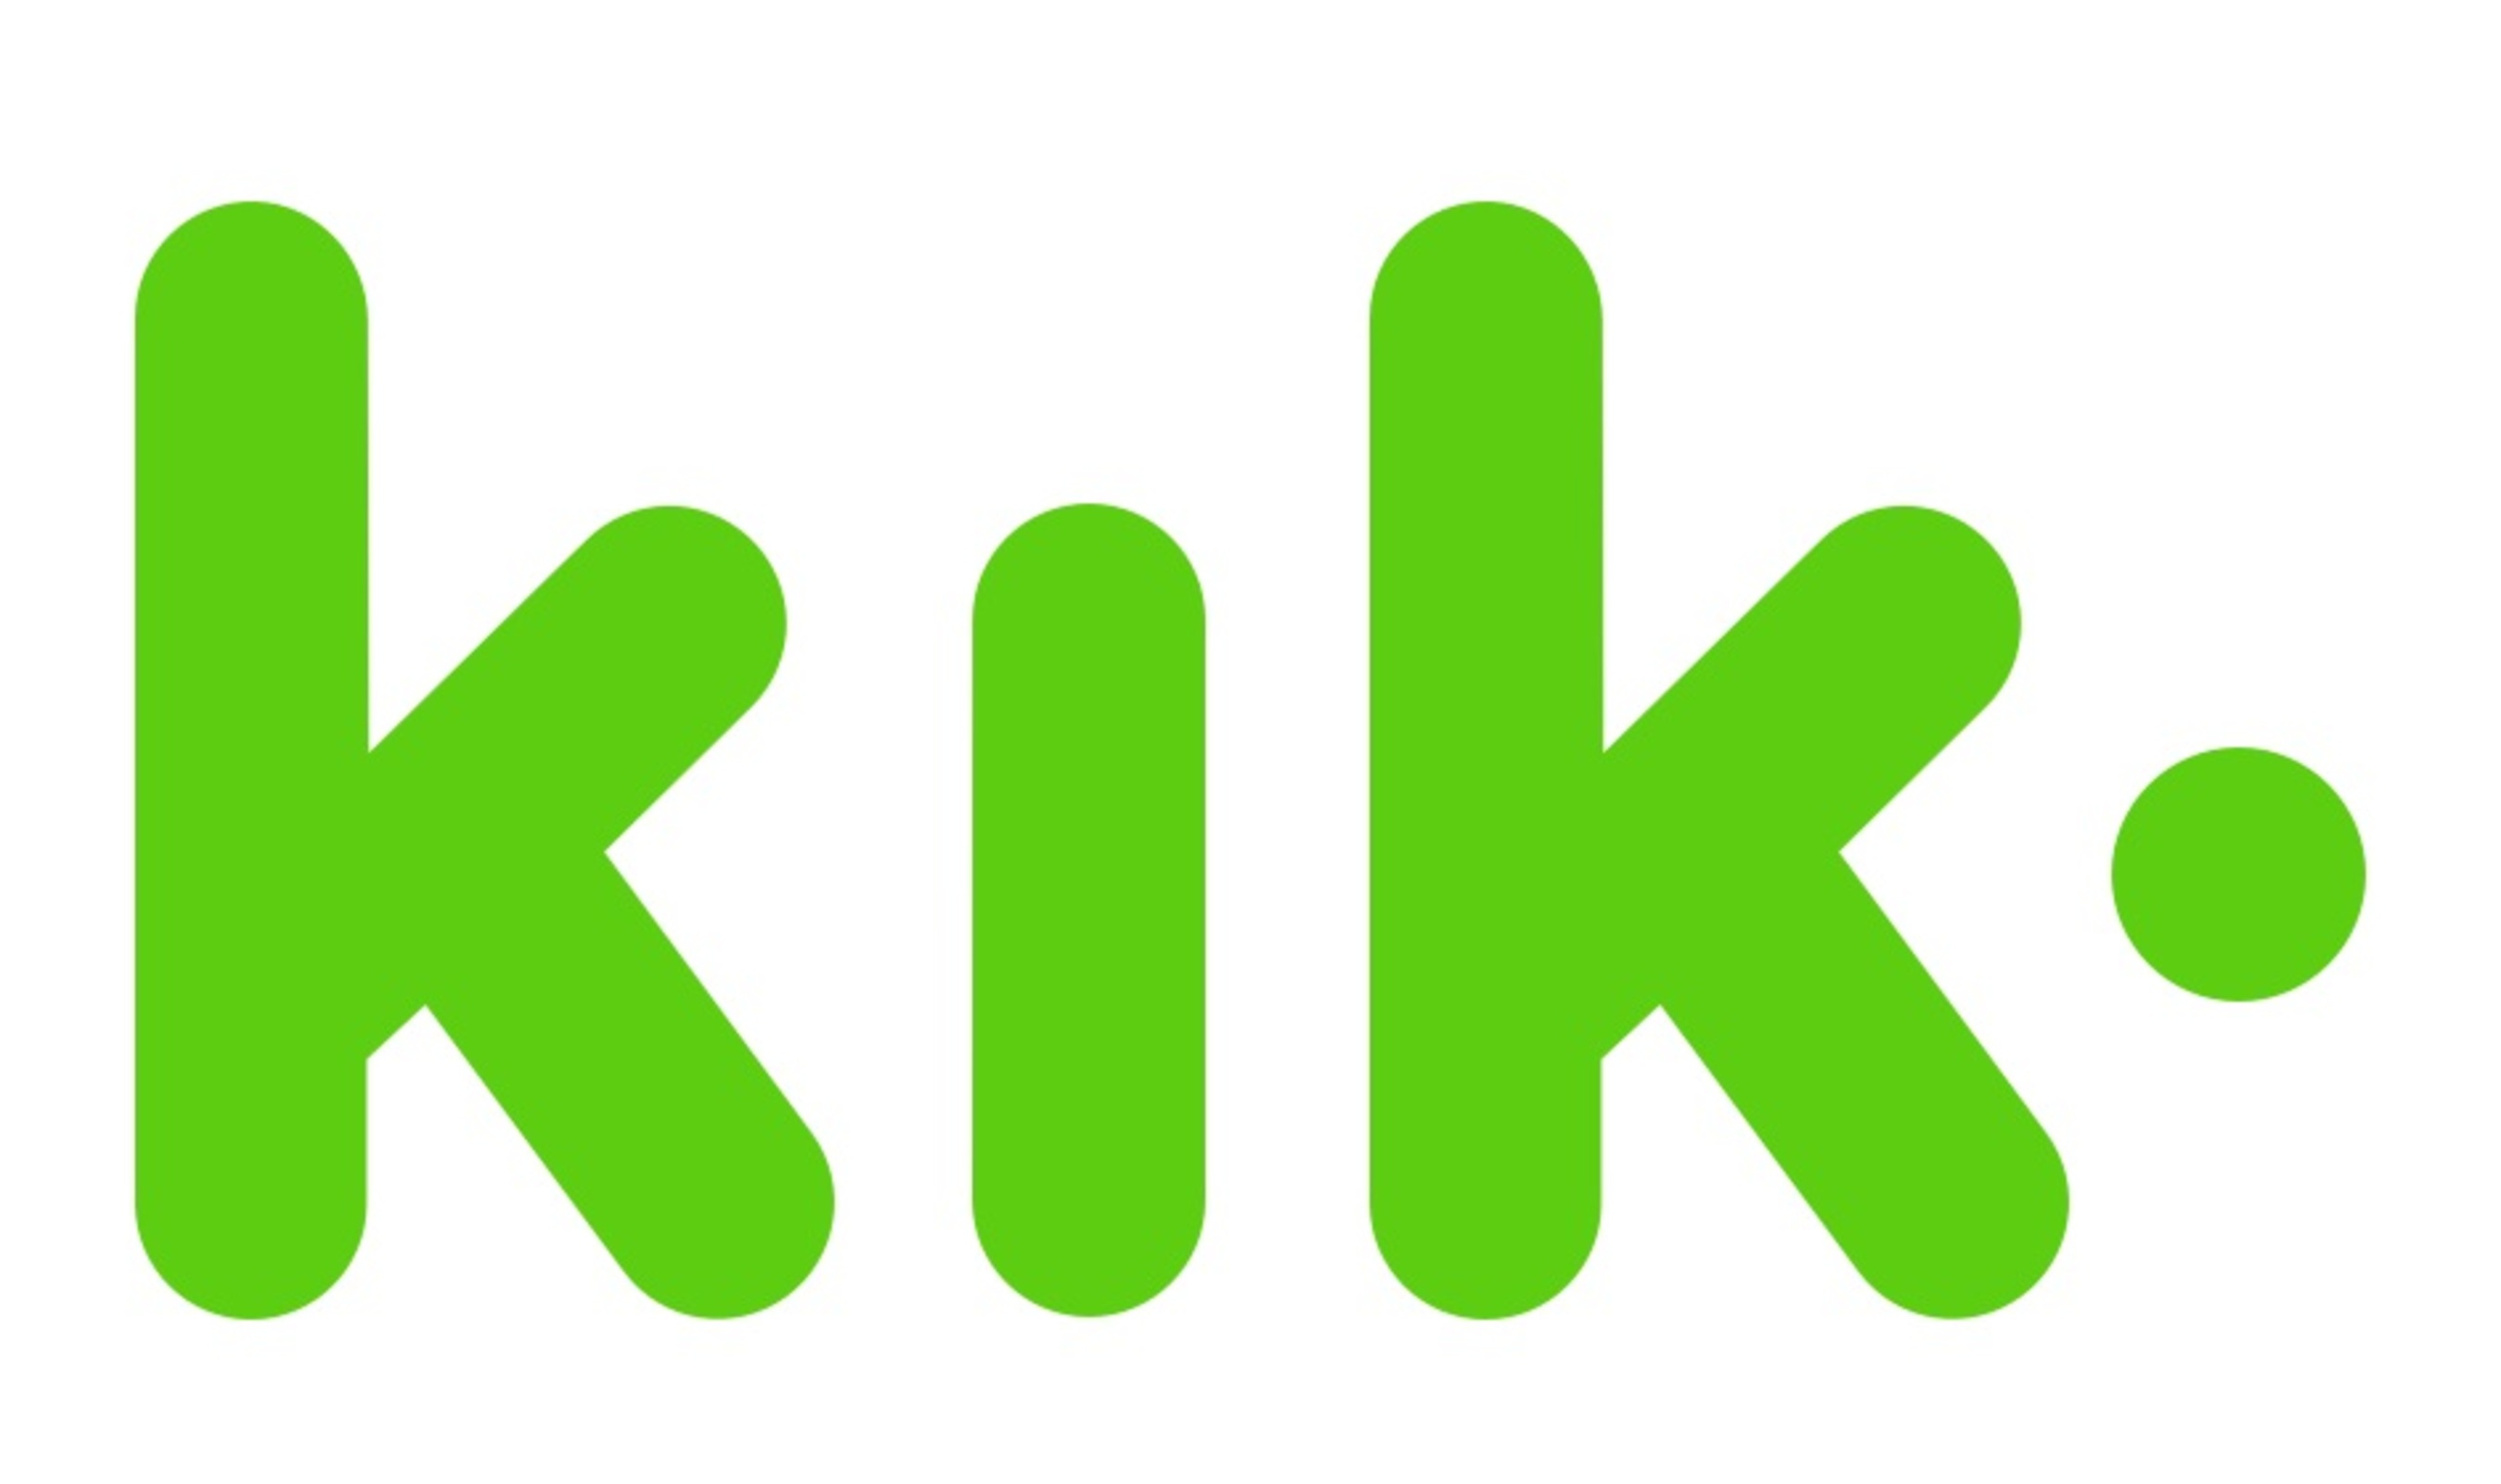 Banzai nok radiator Kik Launches Fashion and Beauty Bot Shop Category with Leading Brands